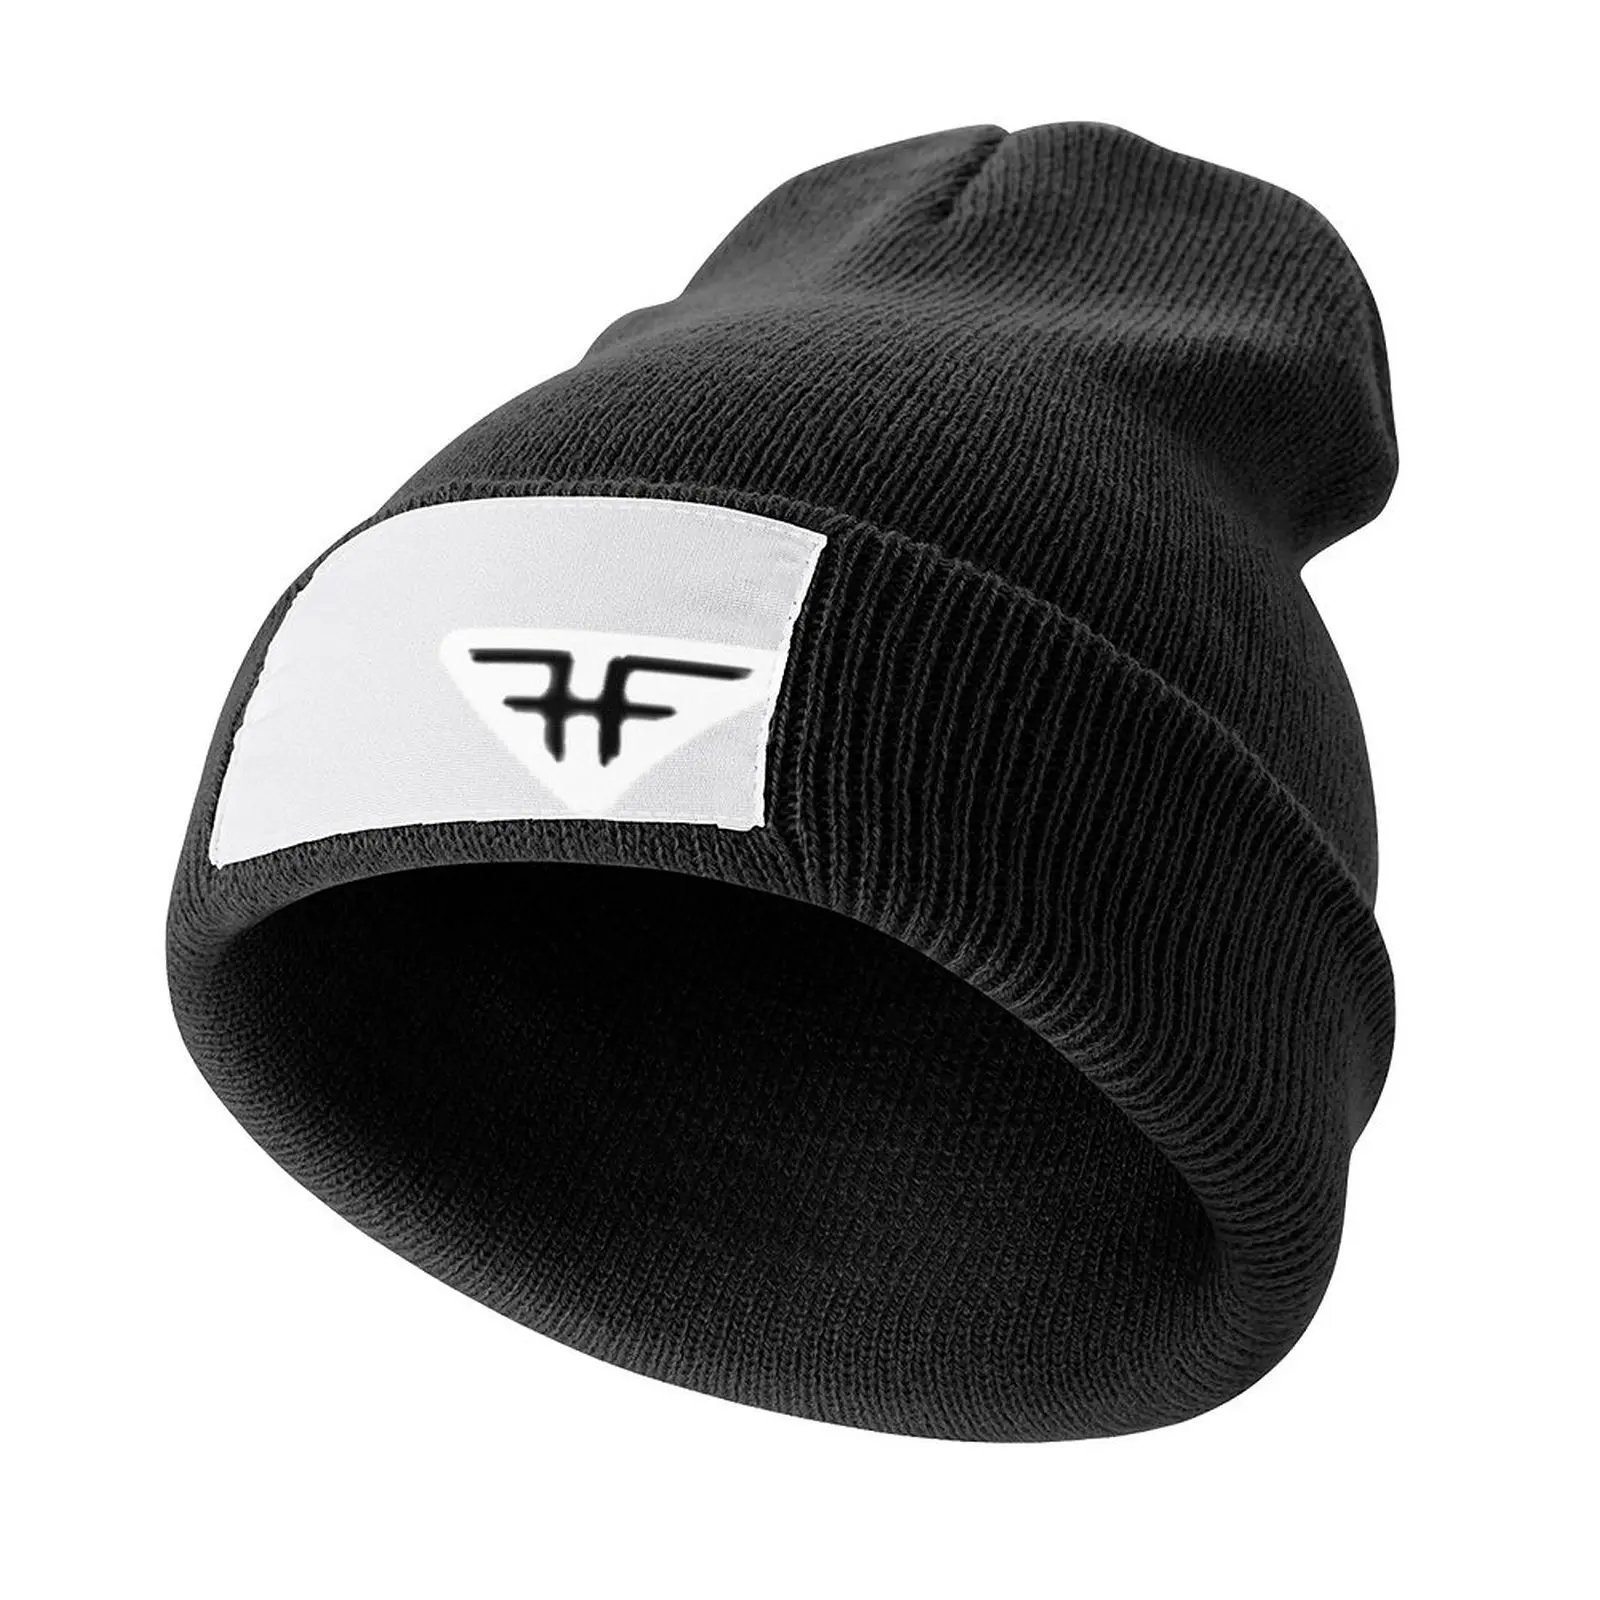 

Logo on phil mickelson hat / Phil mickelson logo / Phil mickelson / Hy flyers hat Knitted Cap Golf Women Beach Fashion Men's